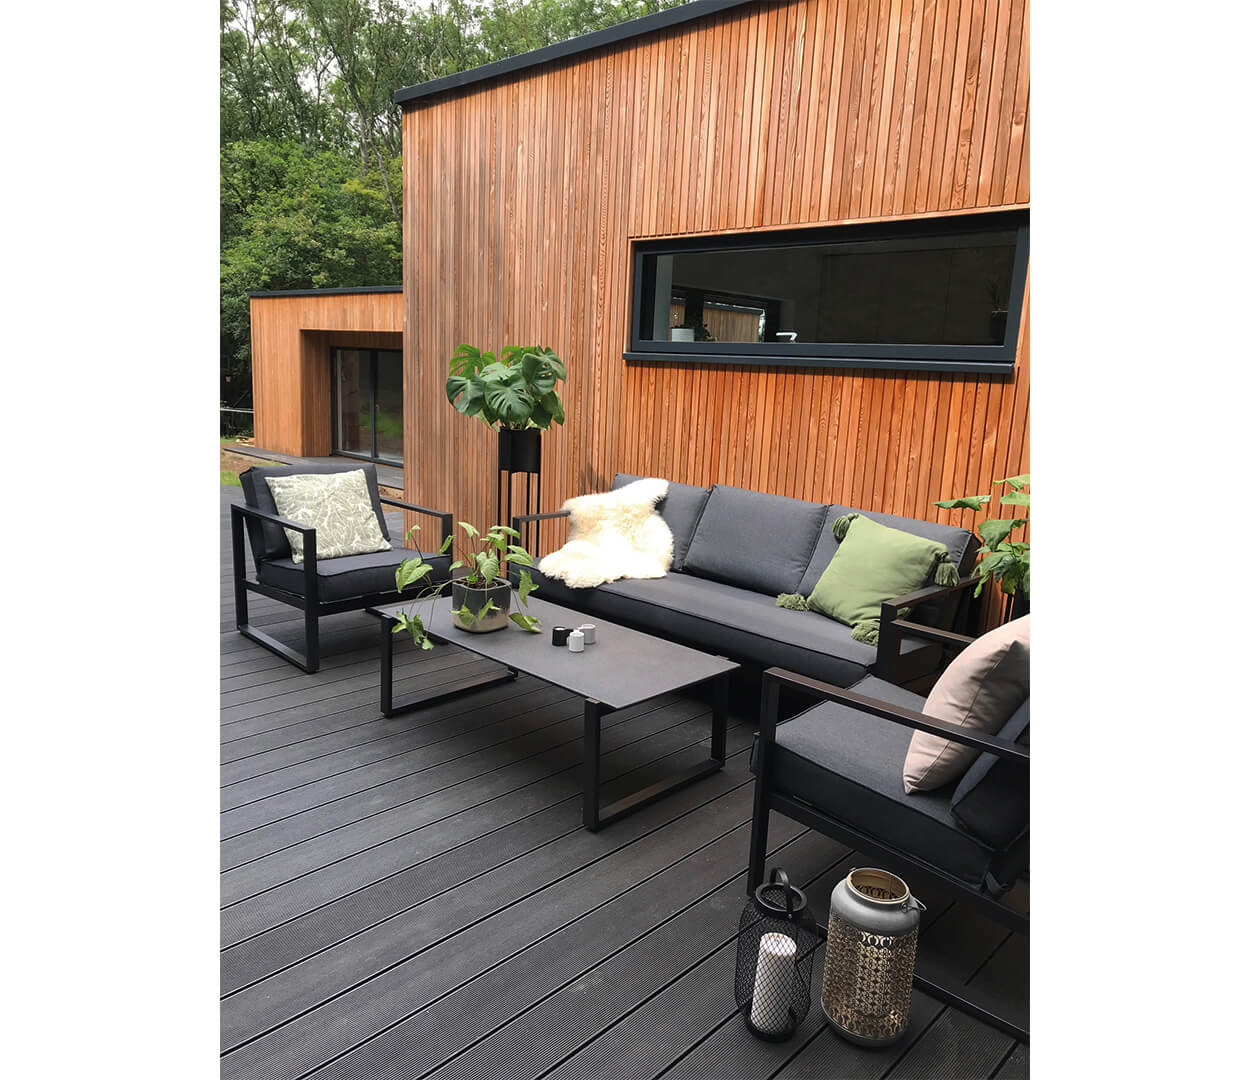 Cladco Charcoal Decking with Timber Clad walls